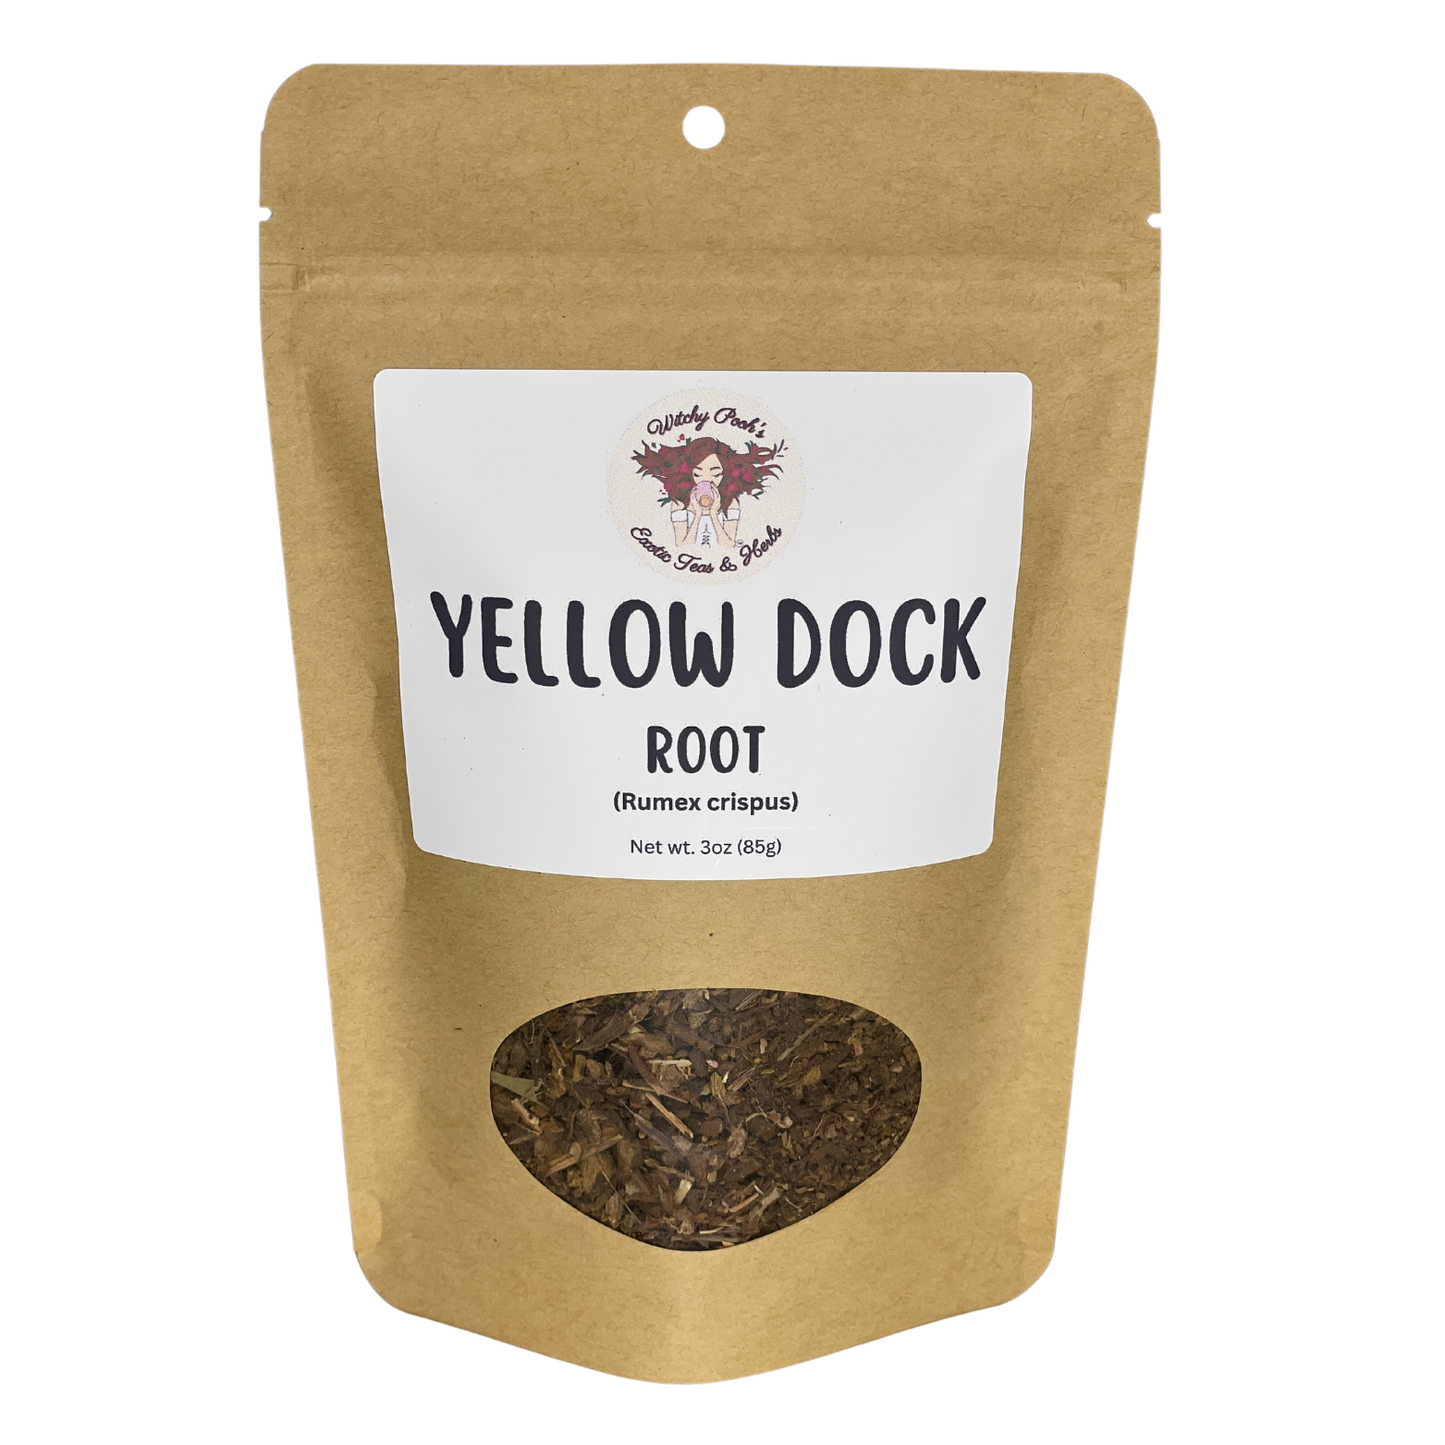 Witchy Pooh's Yellow Dock Root For Blood Purification, Smudging For Ritual to Release Past Traumas-3